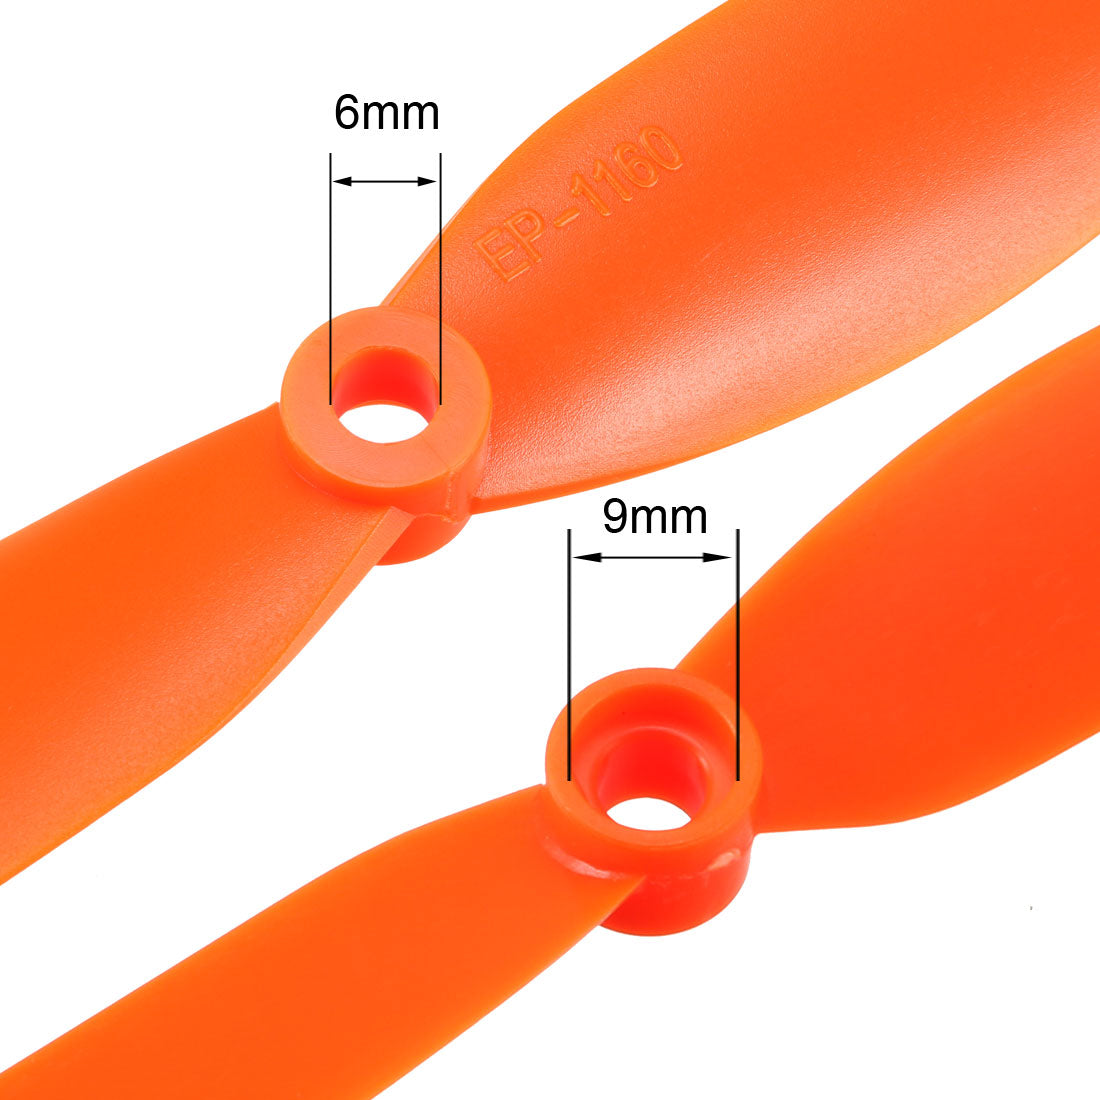 uxcell Uxcell RC Propellers  1160 11x6 Inch 2-Vane Fixed-Wing for Airplane Toy, Nylon Orange 10pcs with Adapter Rings